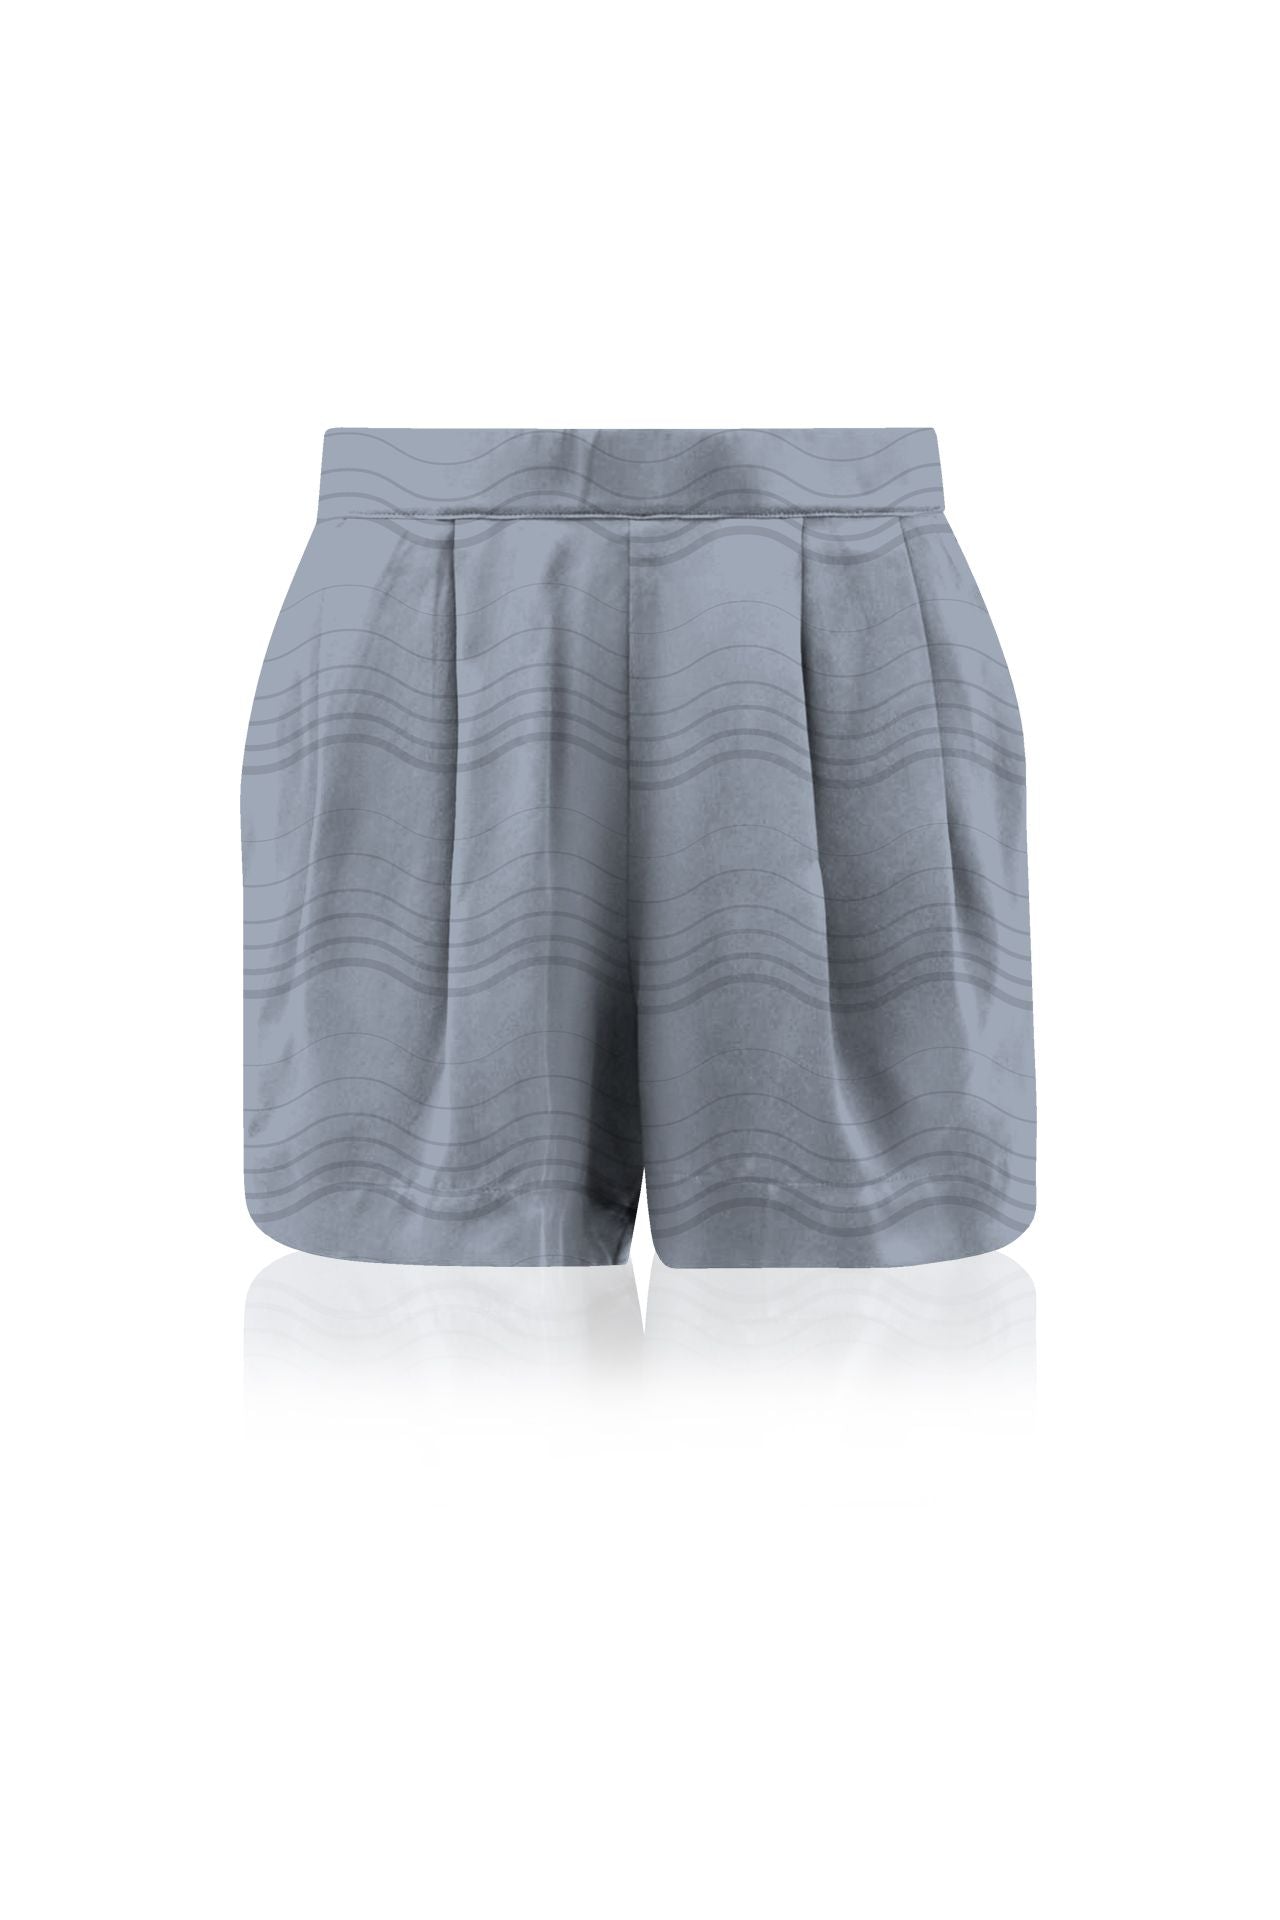 Made With Cupro Biodegradable Fabrics Silk Shorts In Grey